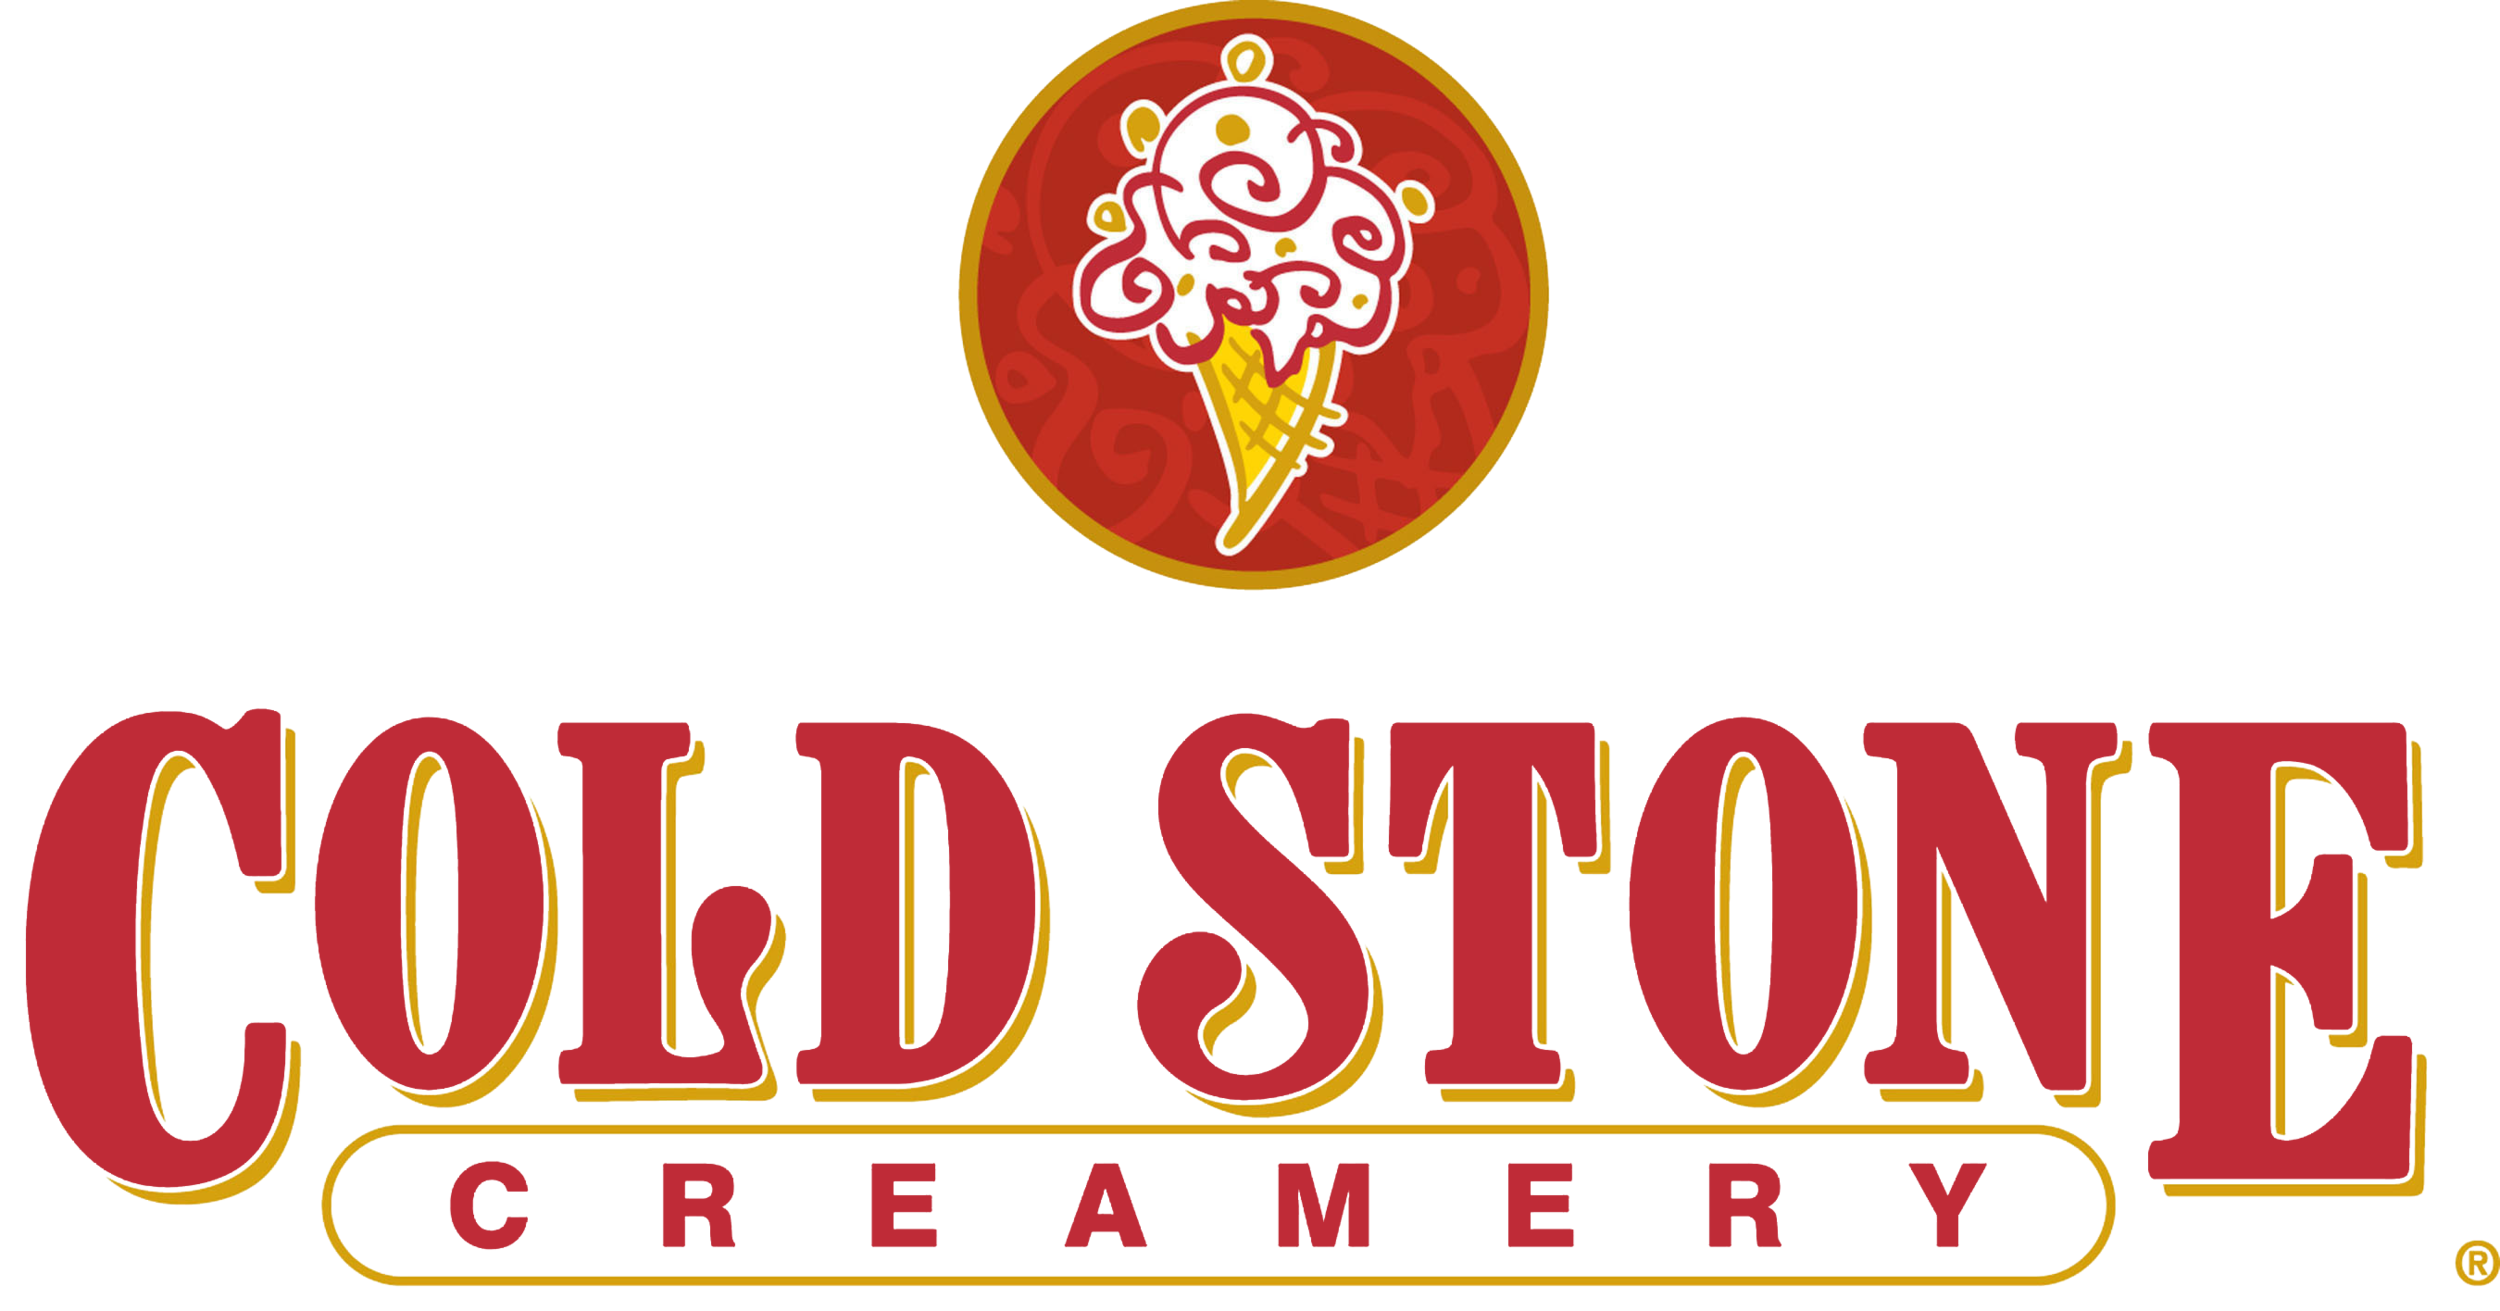 Coldstone.png